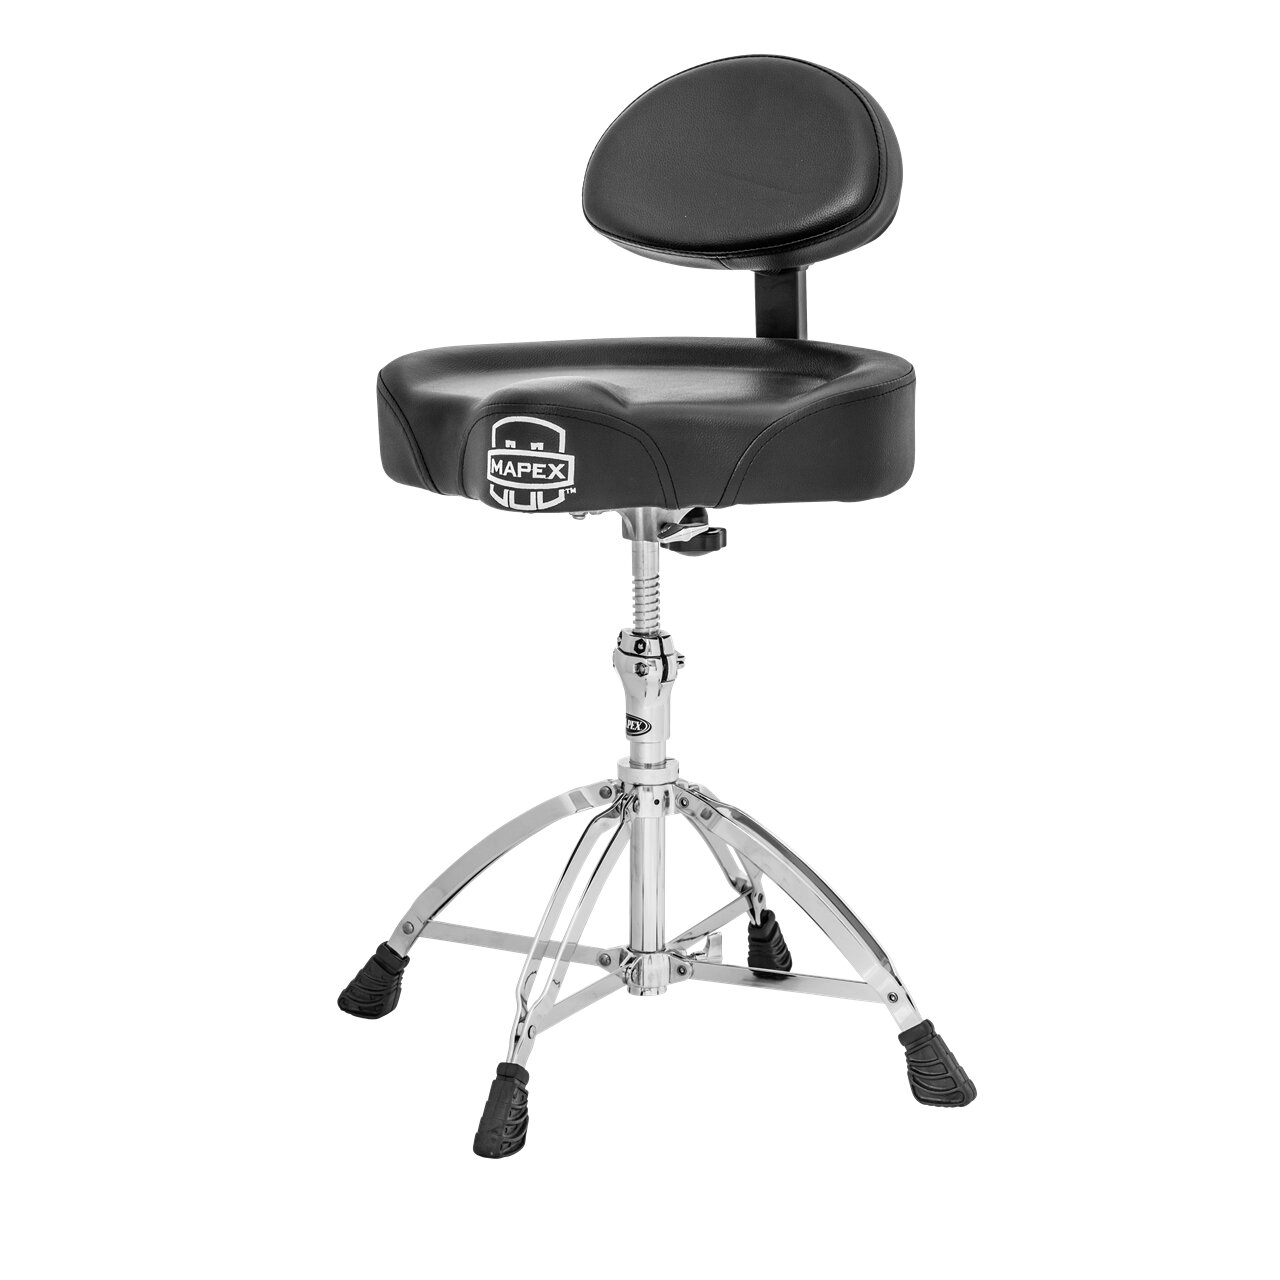 Mapex T875 Drum Stool with Backrest : photo 1